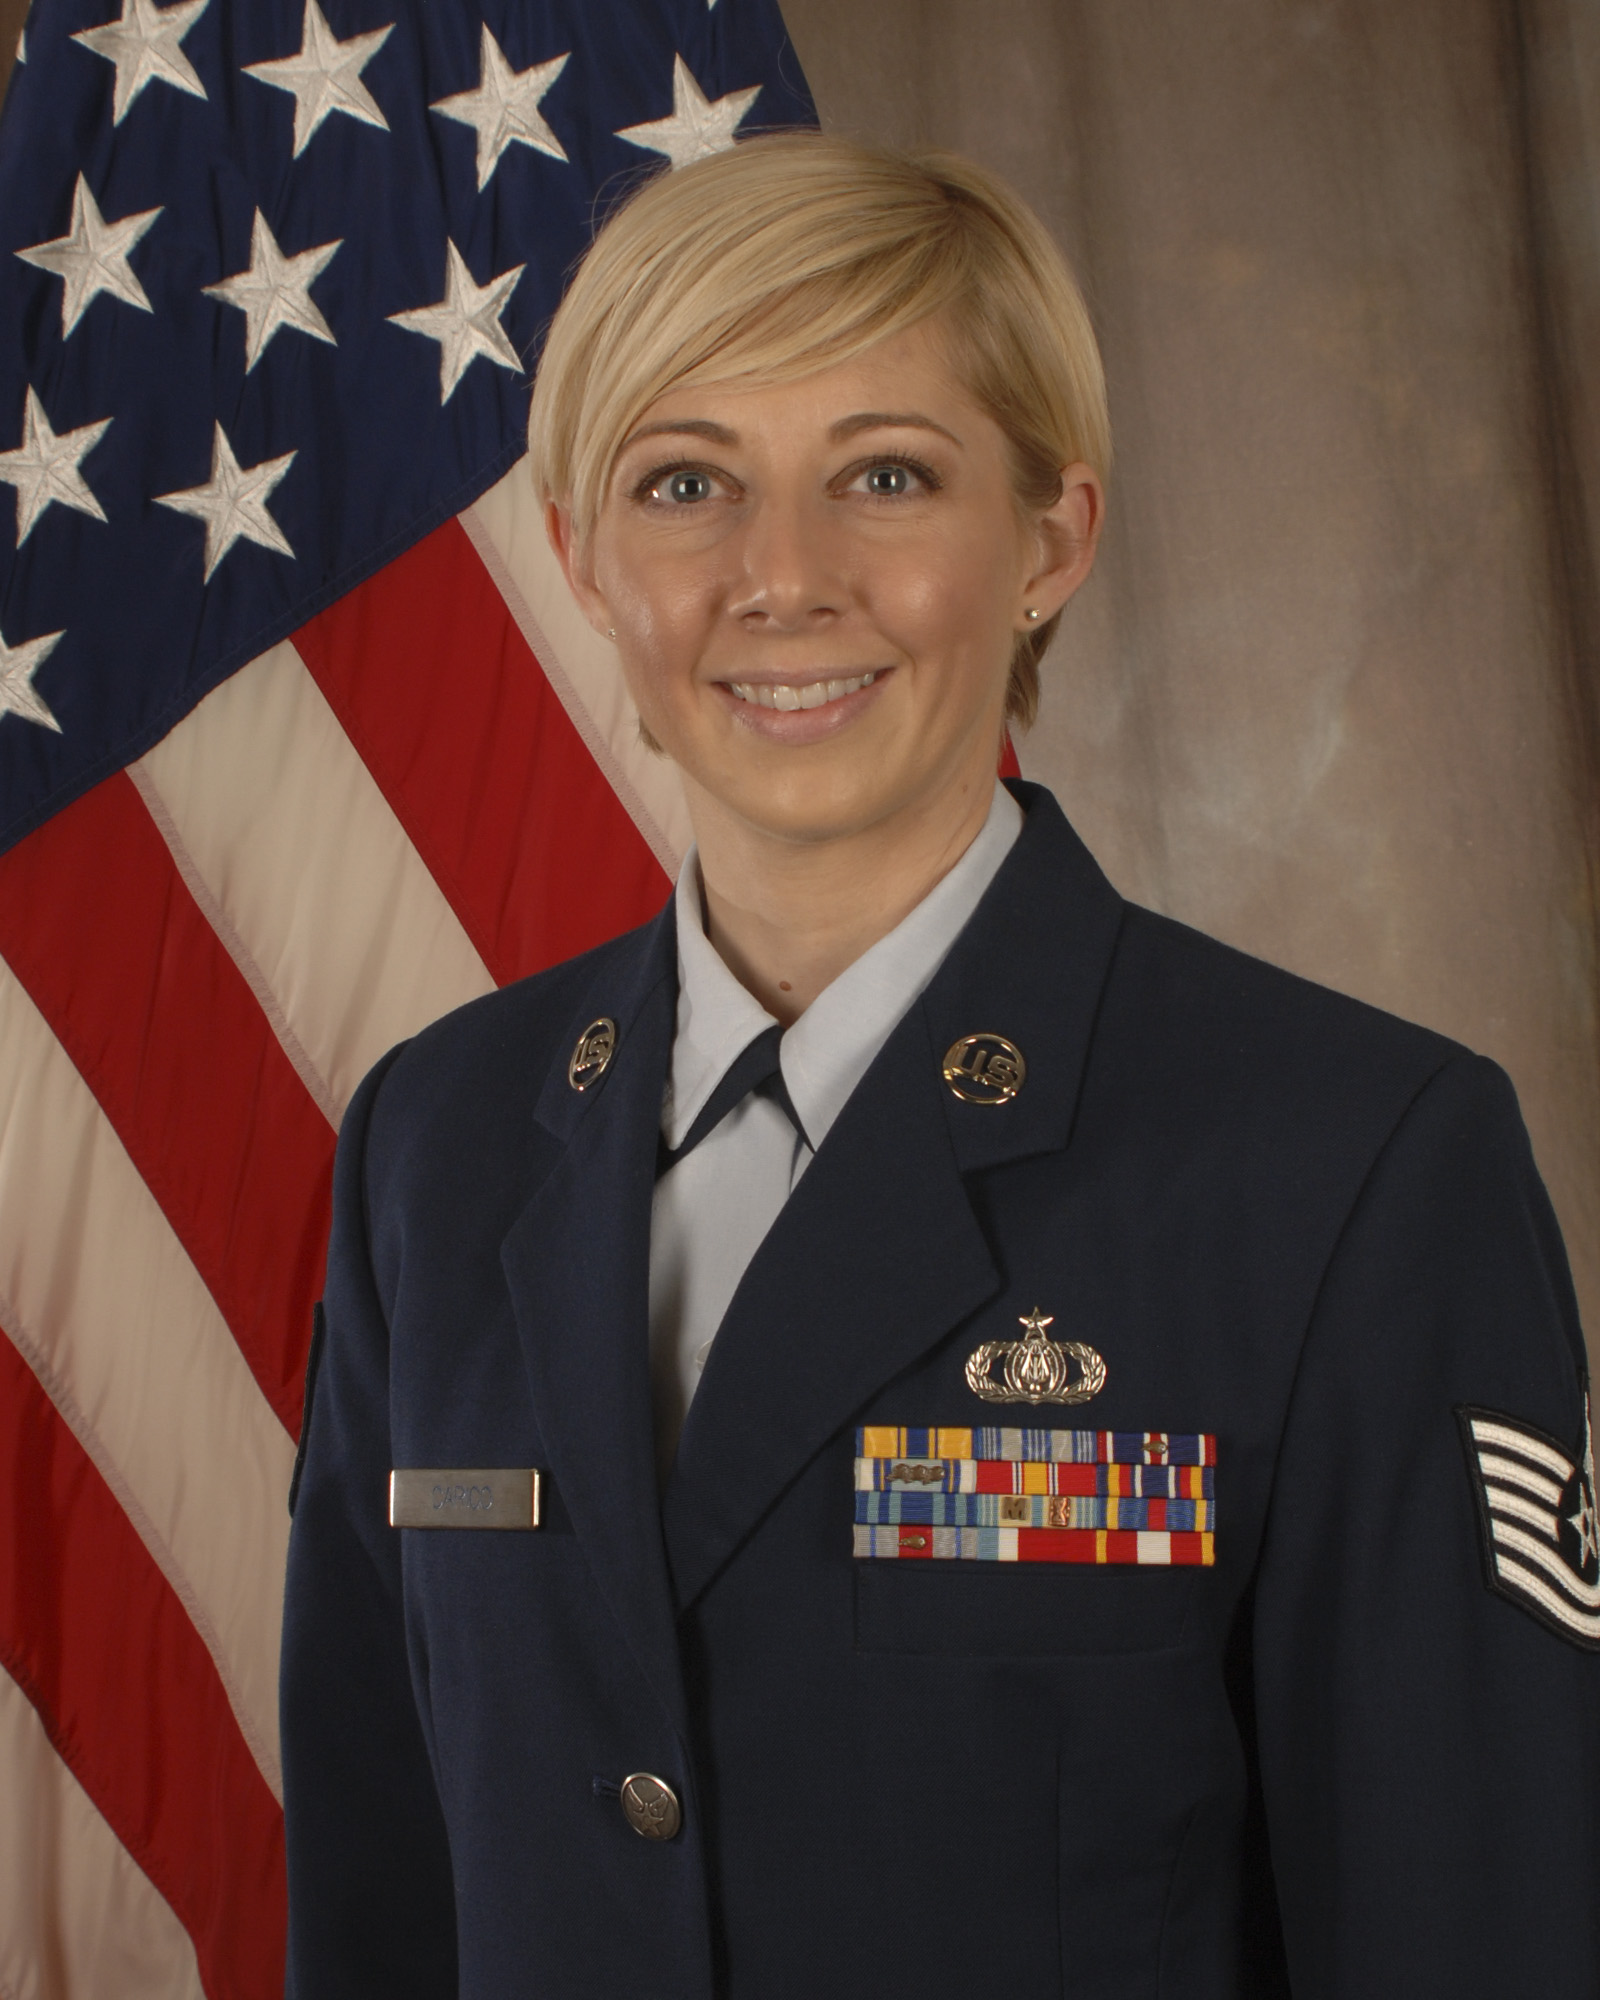 Technical Sergeant Traci Carico, First Sergeant of the Air National Guard Band of the South